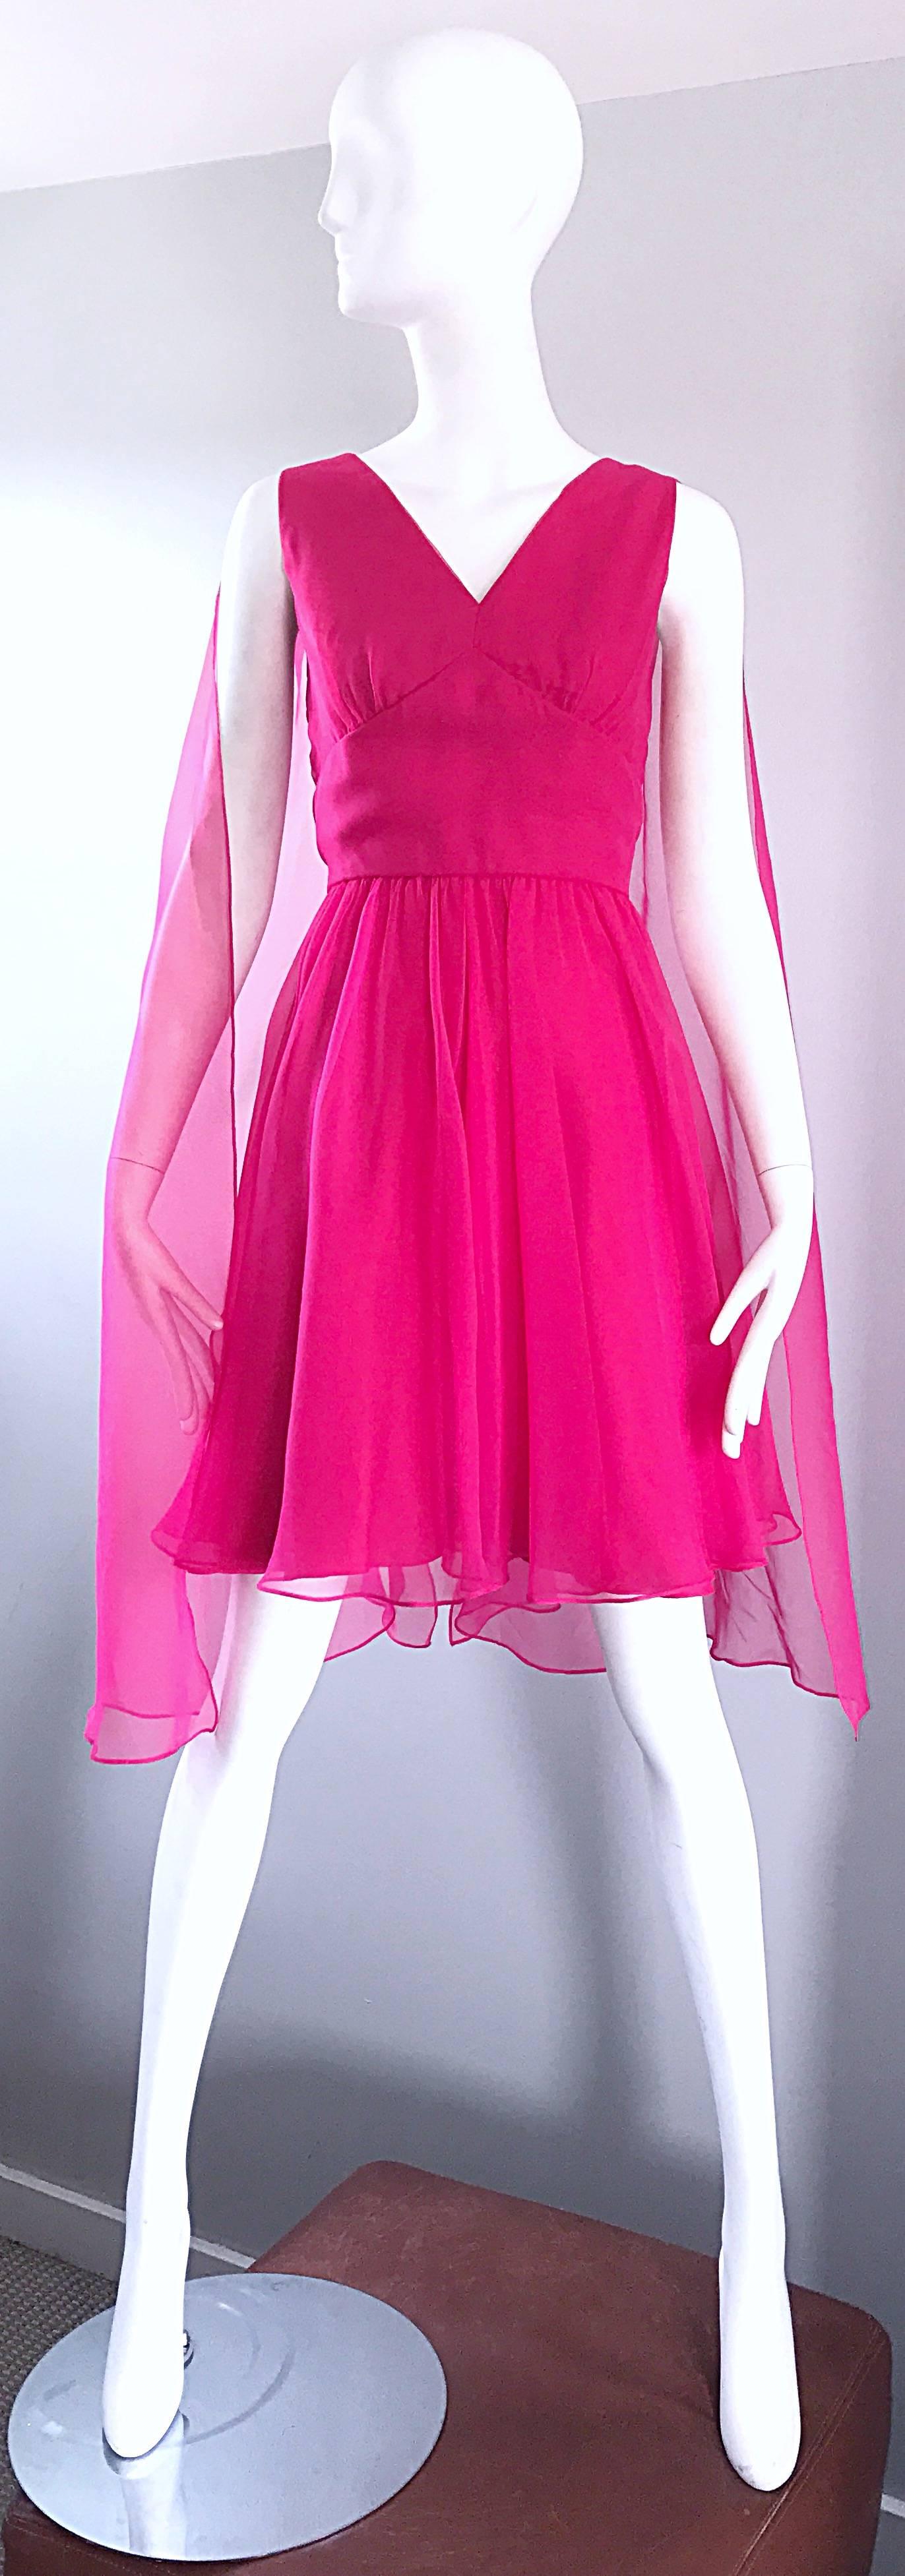 Incredible 1960 hot pink chiffon dress with attached semi sheer chiffon cape! Features a form fitting bodice with flattering and flirty skirt. Hidden zipper up the back with hook-and-eye closure. Looks amazing on, especially with movement. Works